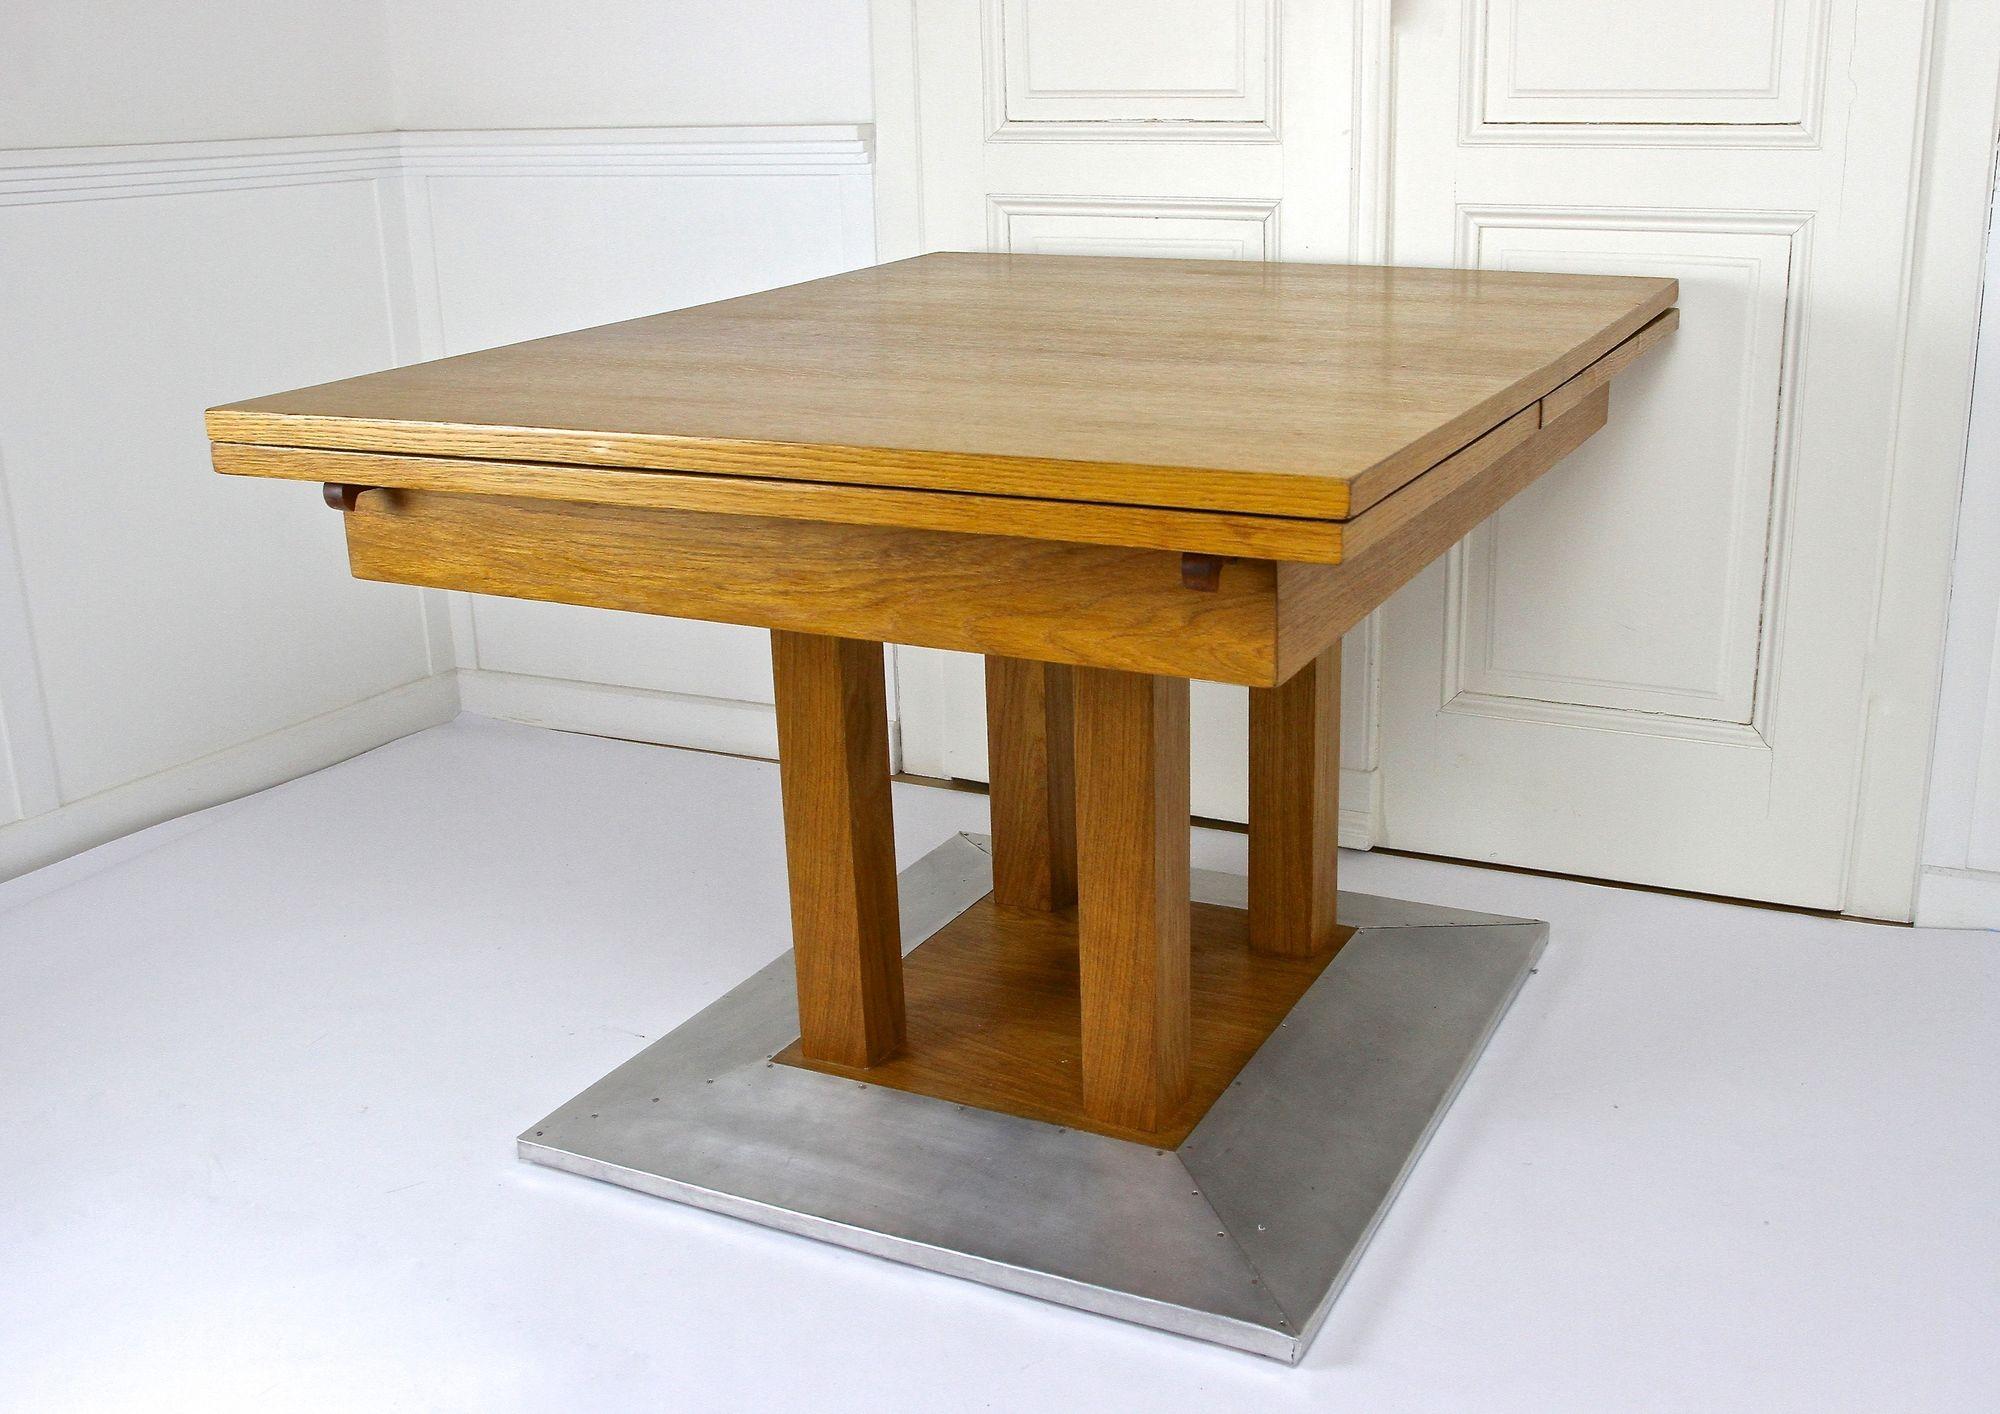 20th Century Extendable Oakwood Dining Table by Josef Hoffmann, AT ca. 1905 For Sale 3